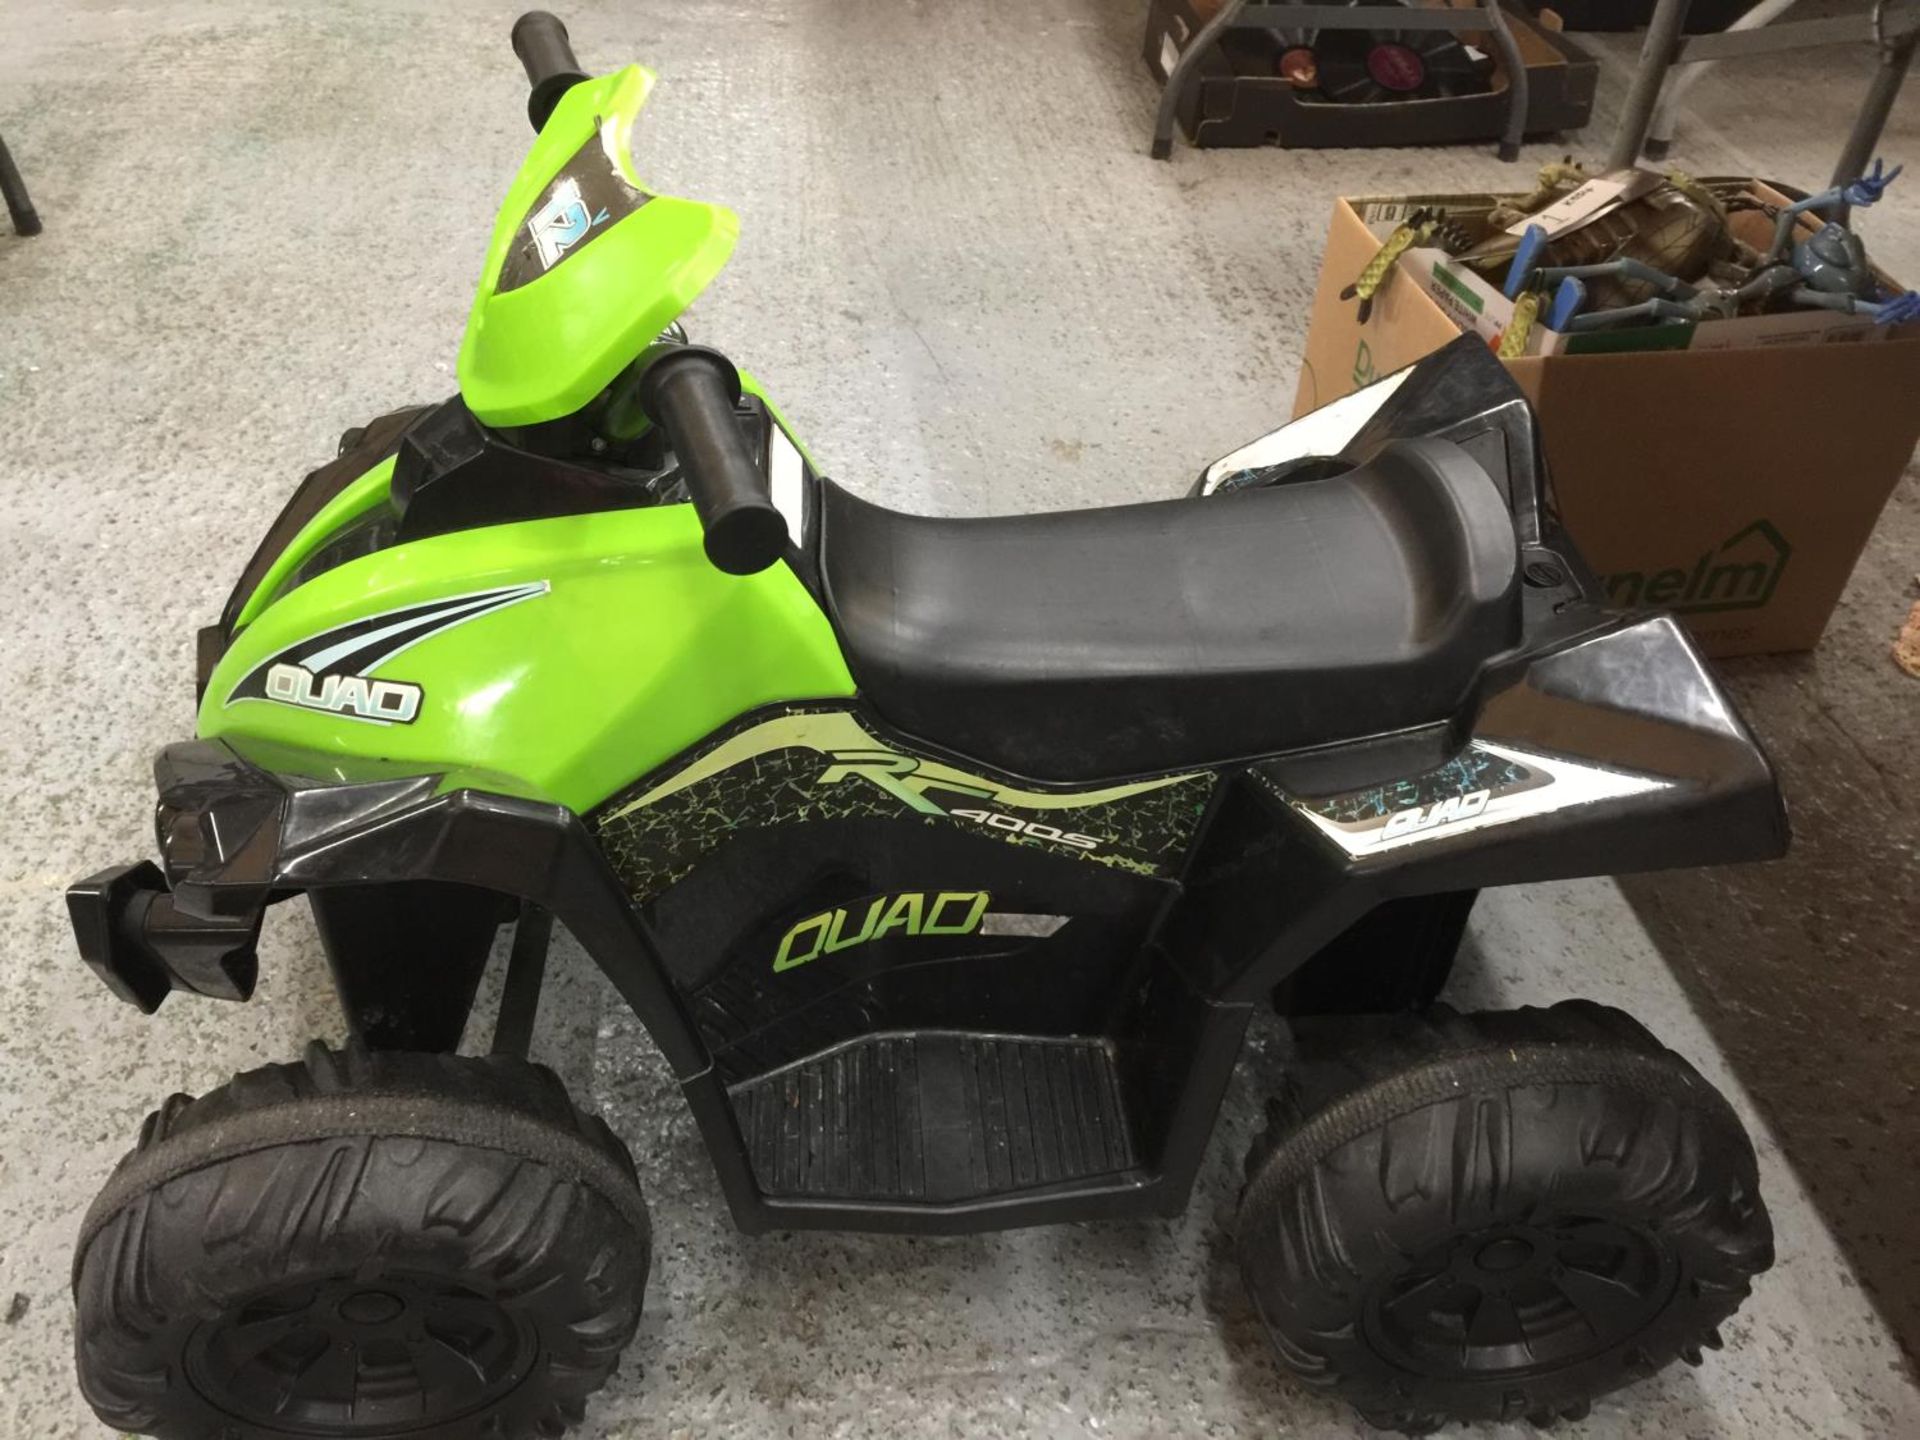 A CHILDREN'S ELECTRIC QUAD BIKE WITH CHARGER - VENDOR STATES IN WORKING ORDER AND VERY LITTLE USE,